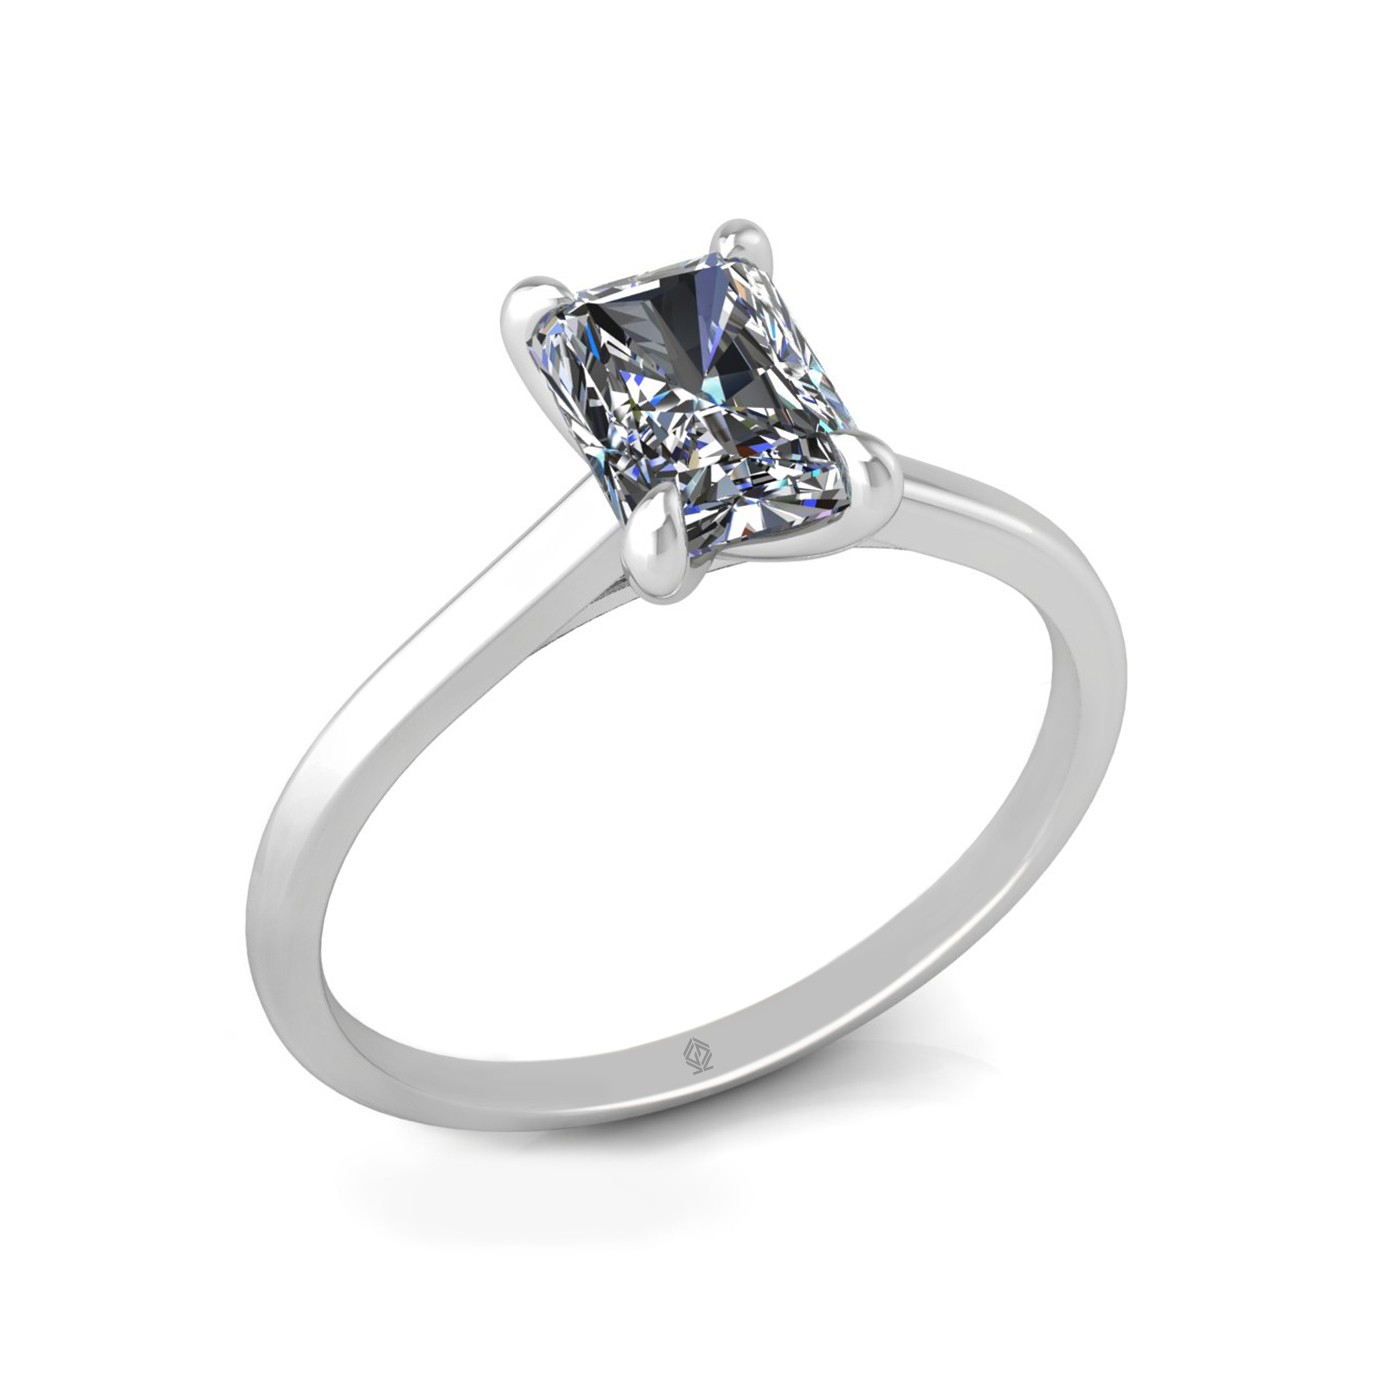 18k white gold  1,20 ct 4 prongs solitaire radiant cut diamond engagement ring with whisper thin band